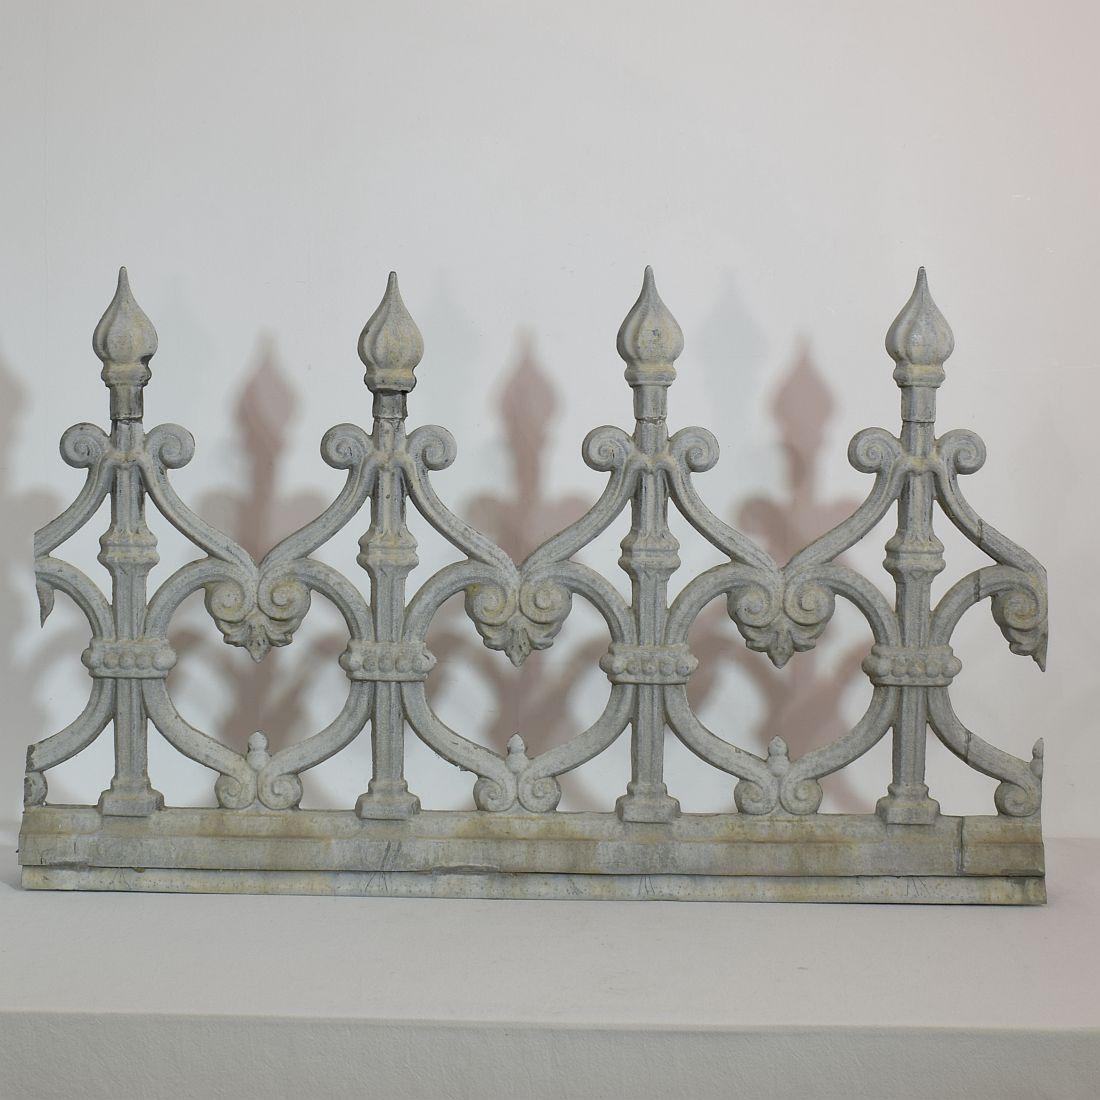 Pair of 19th Century French Zinc Architectural Roof Ornaments or Finials 6